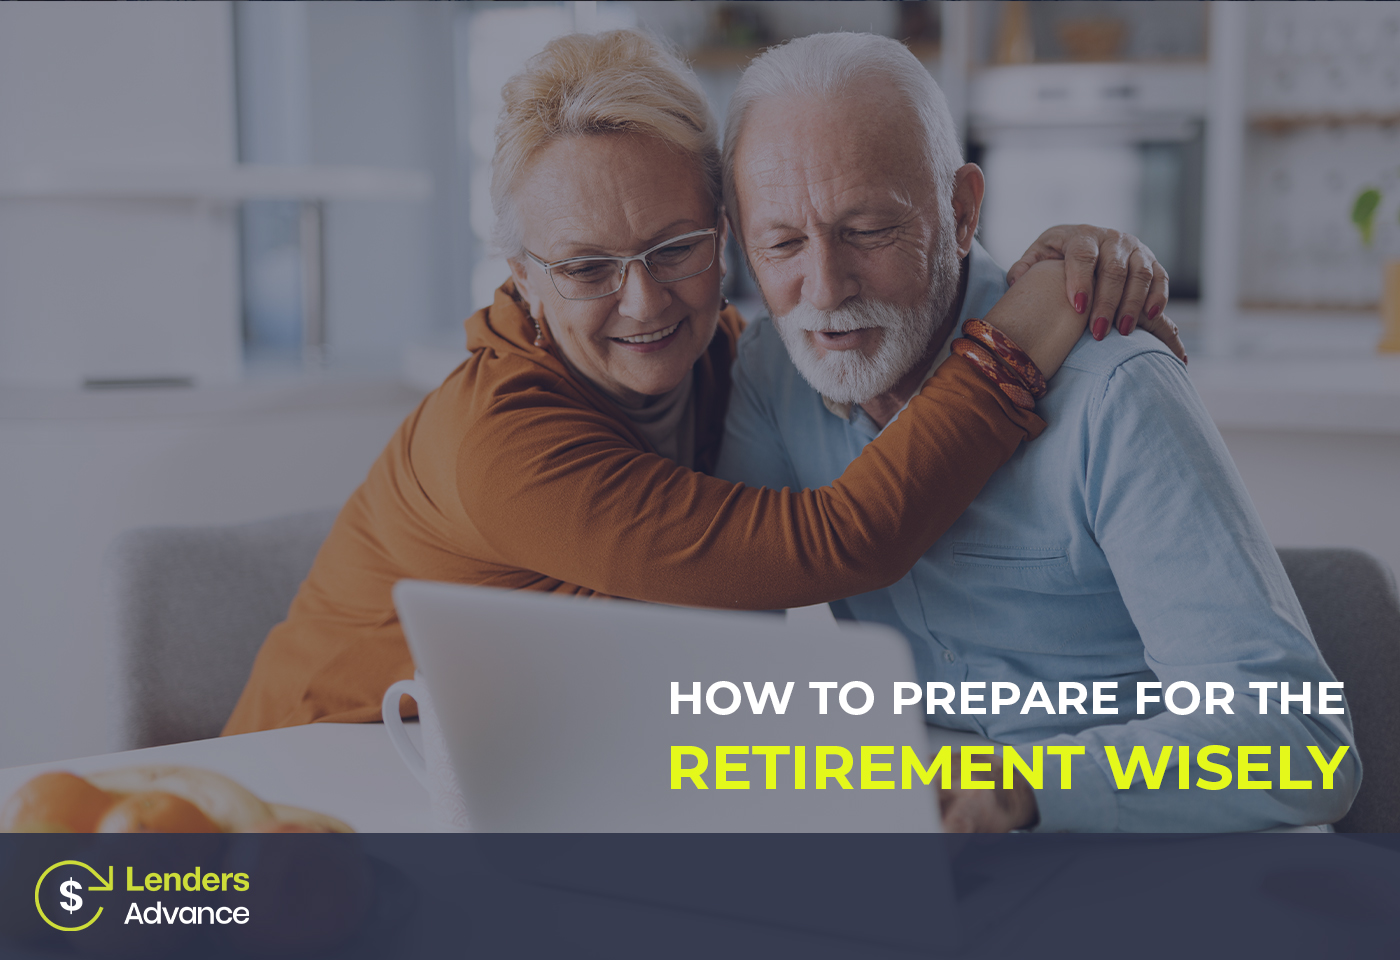 How to Prepare for the Retirement Wisely